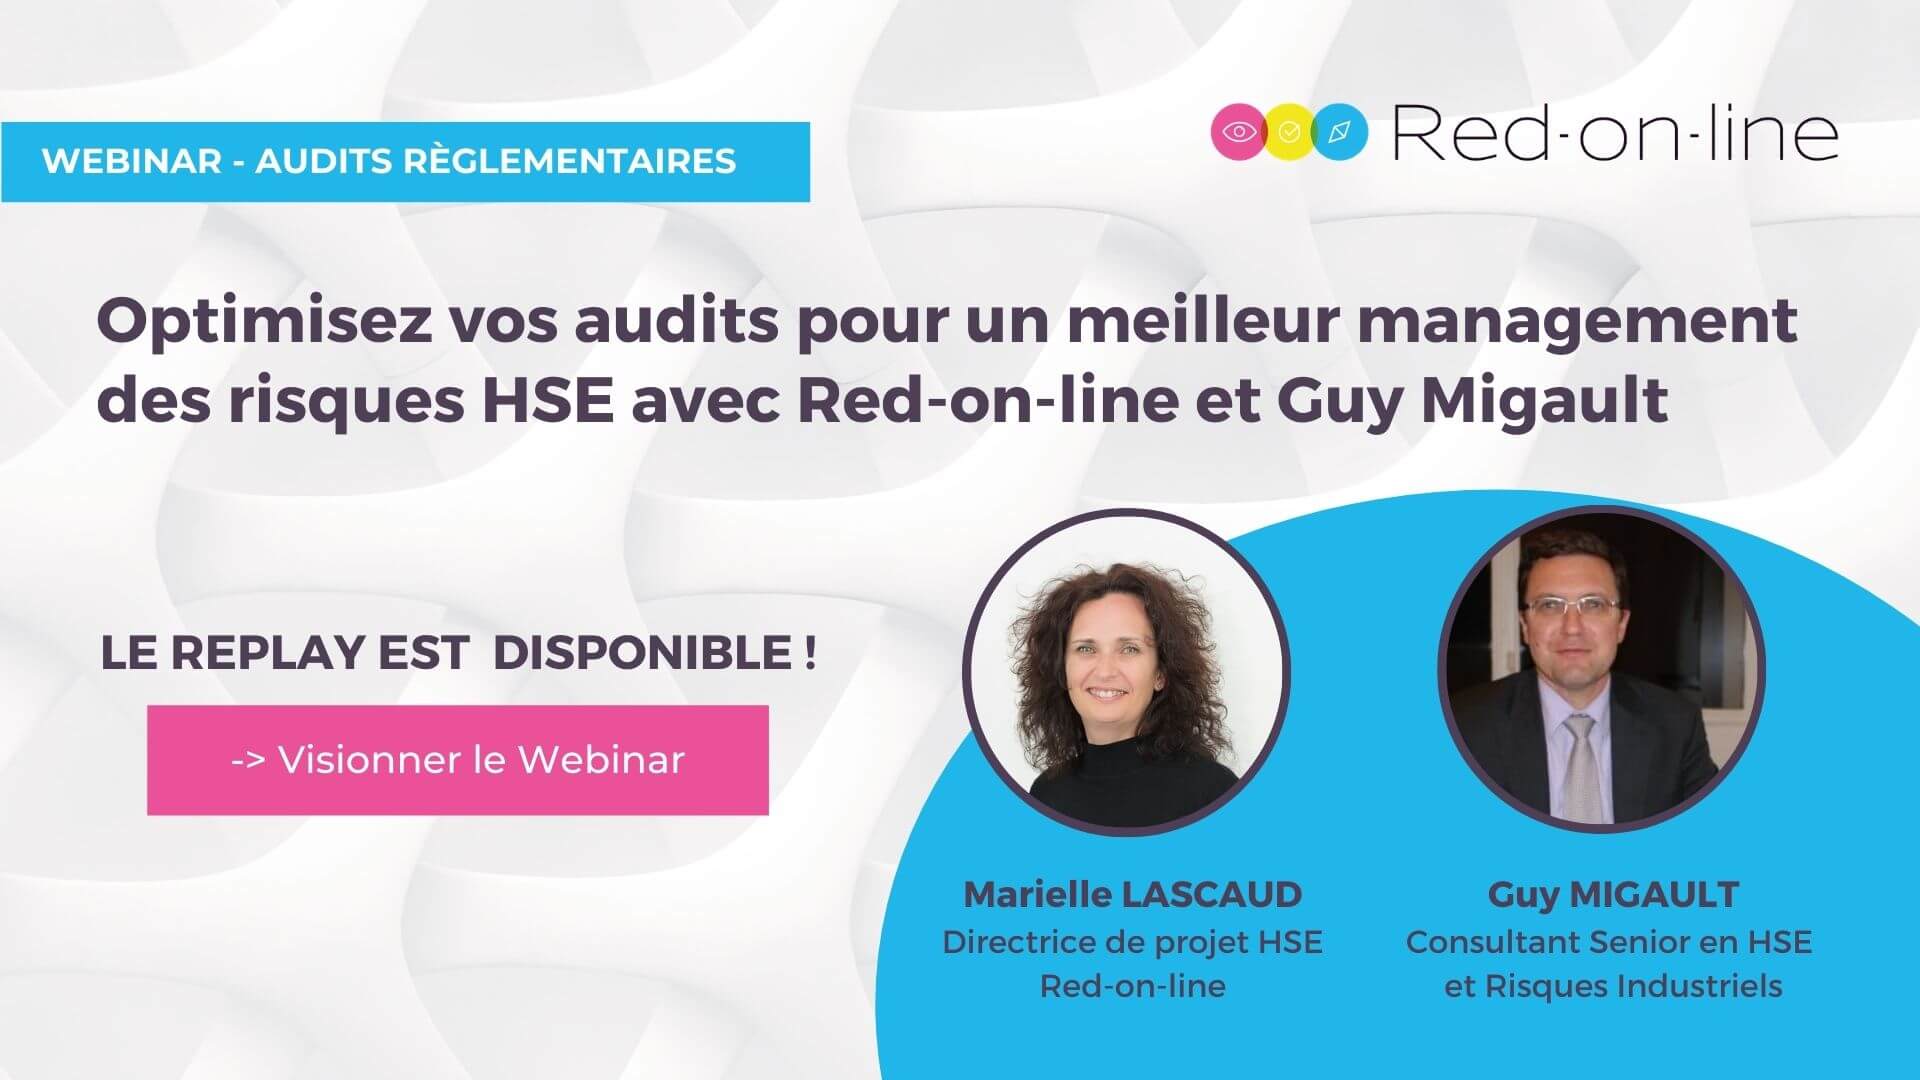 webinar-red-on-line-audits-reglementaire-guy-migault-replay